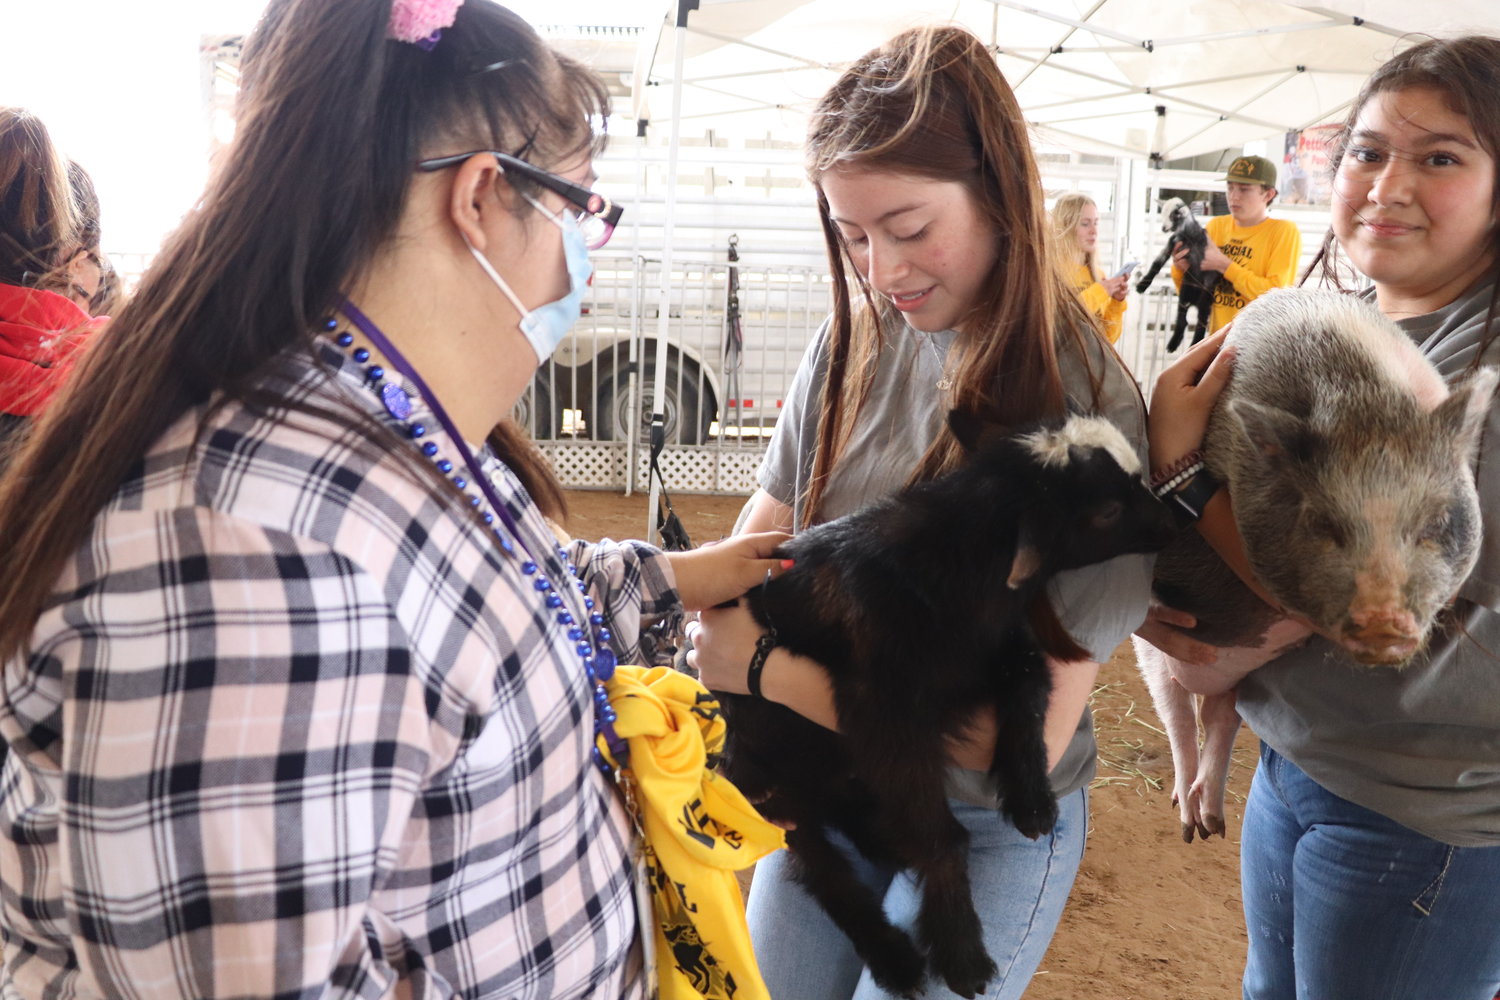 Petting goats, pigs, and other livestock is a big part of the Katy Special Rodeo.